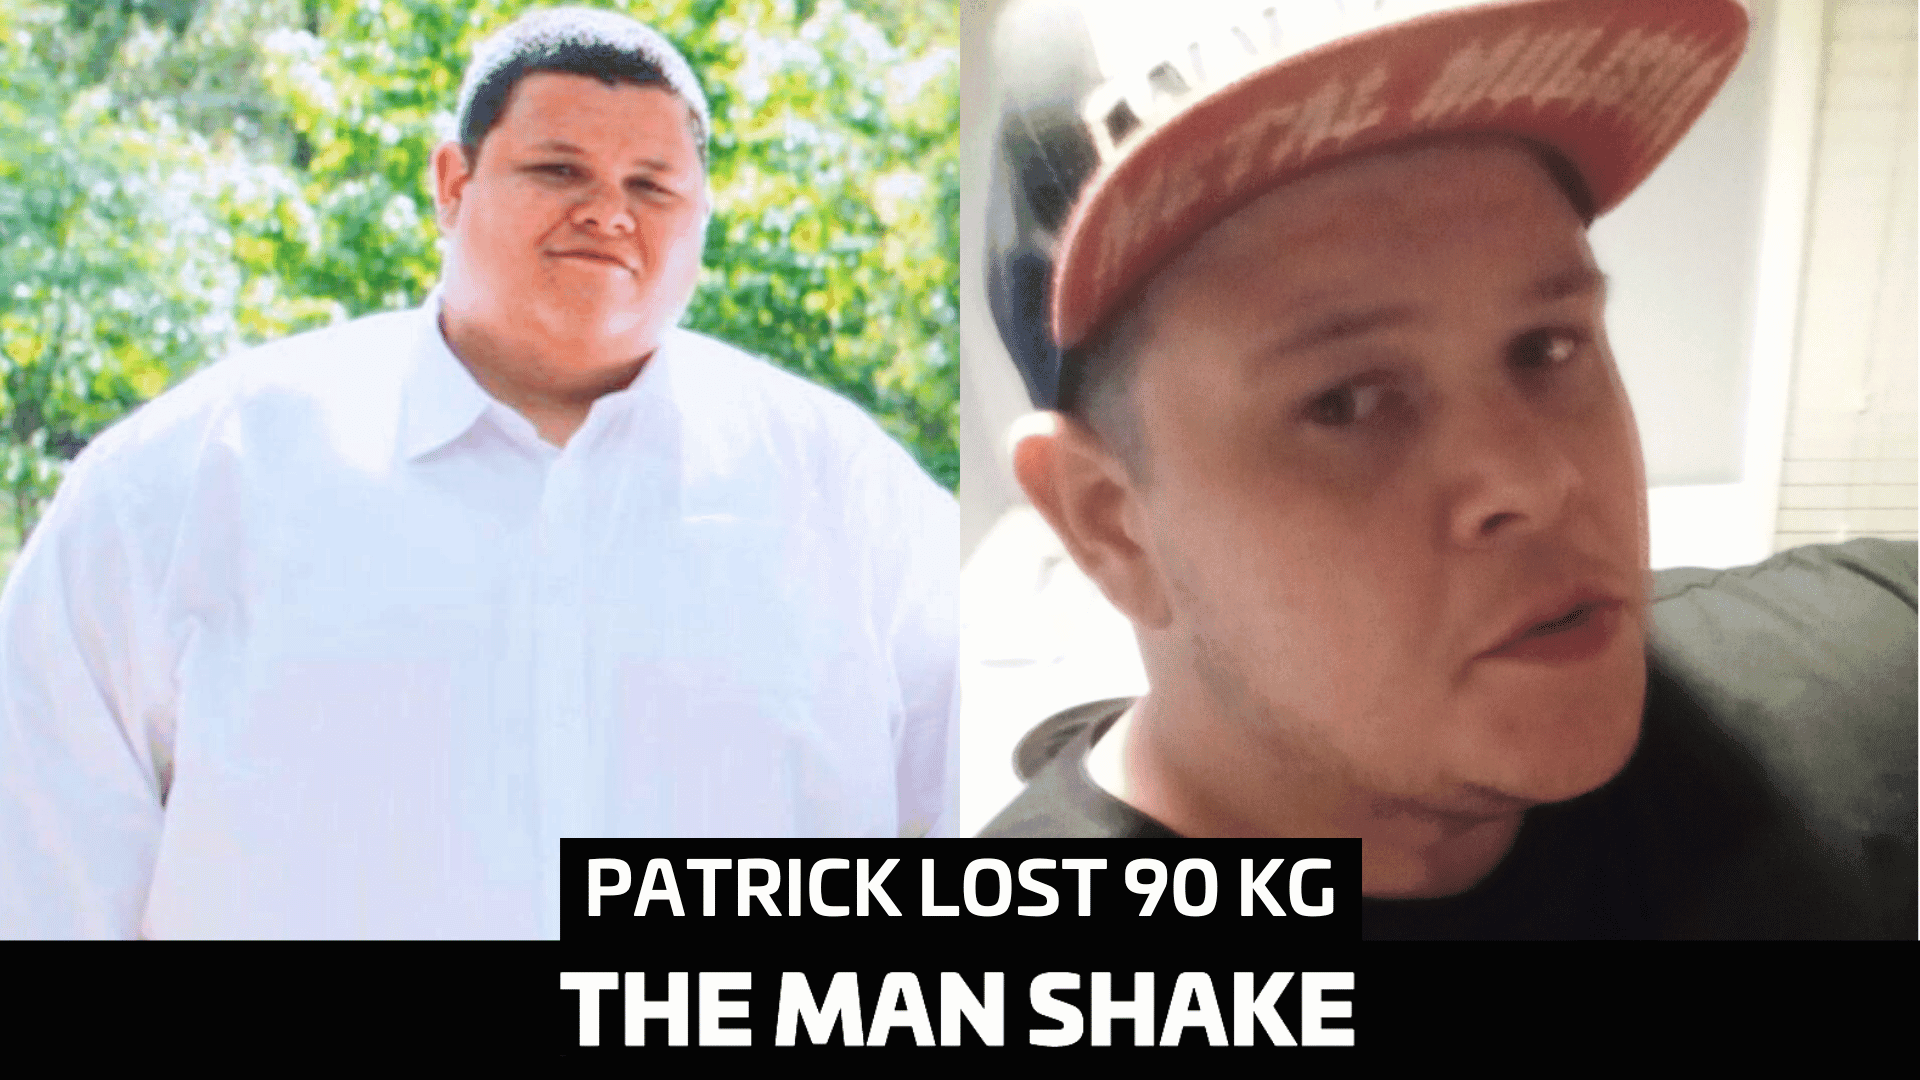 Patrick lost 90kgs thanks to the Man Shake